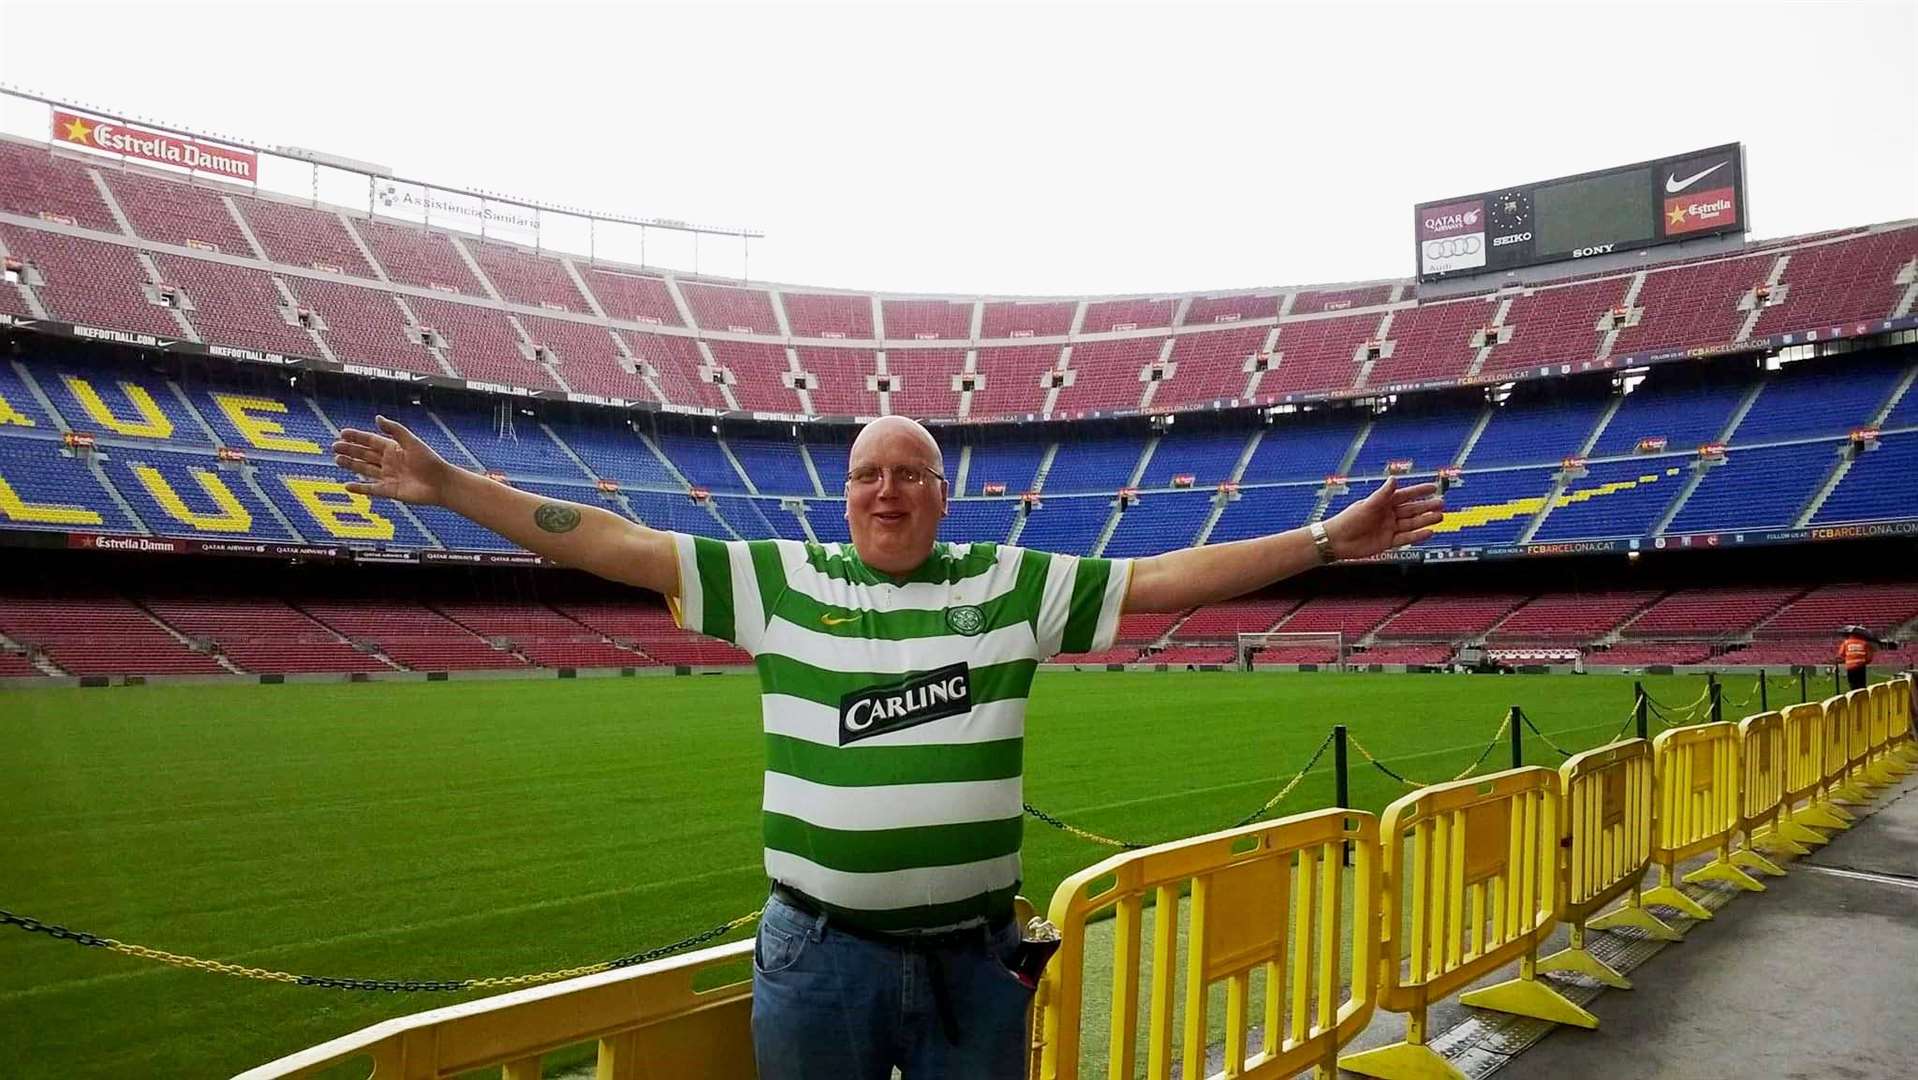 Dave Paterson on a visit to Barcelona’s Camp Nou stadium.